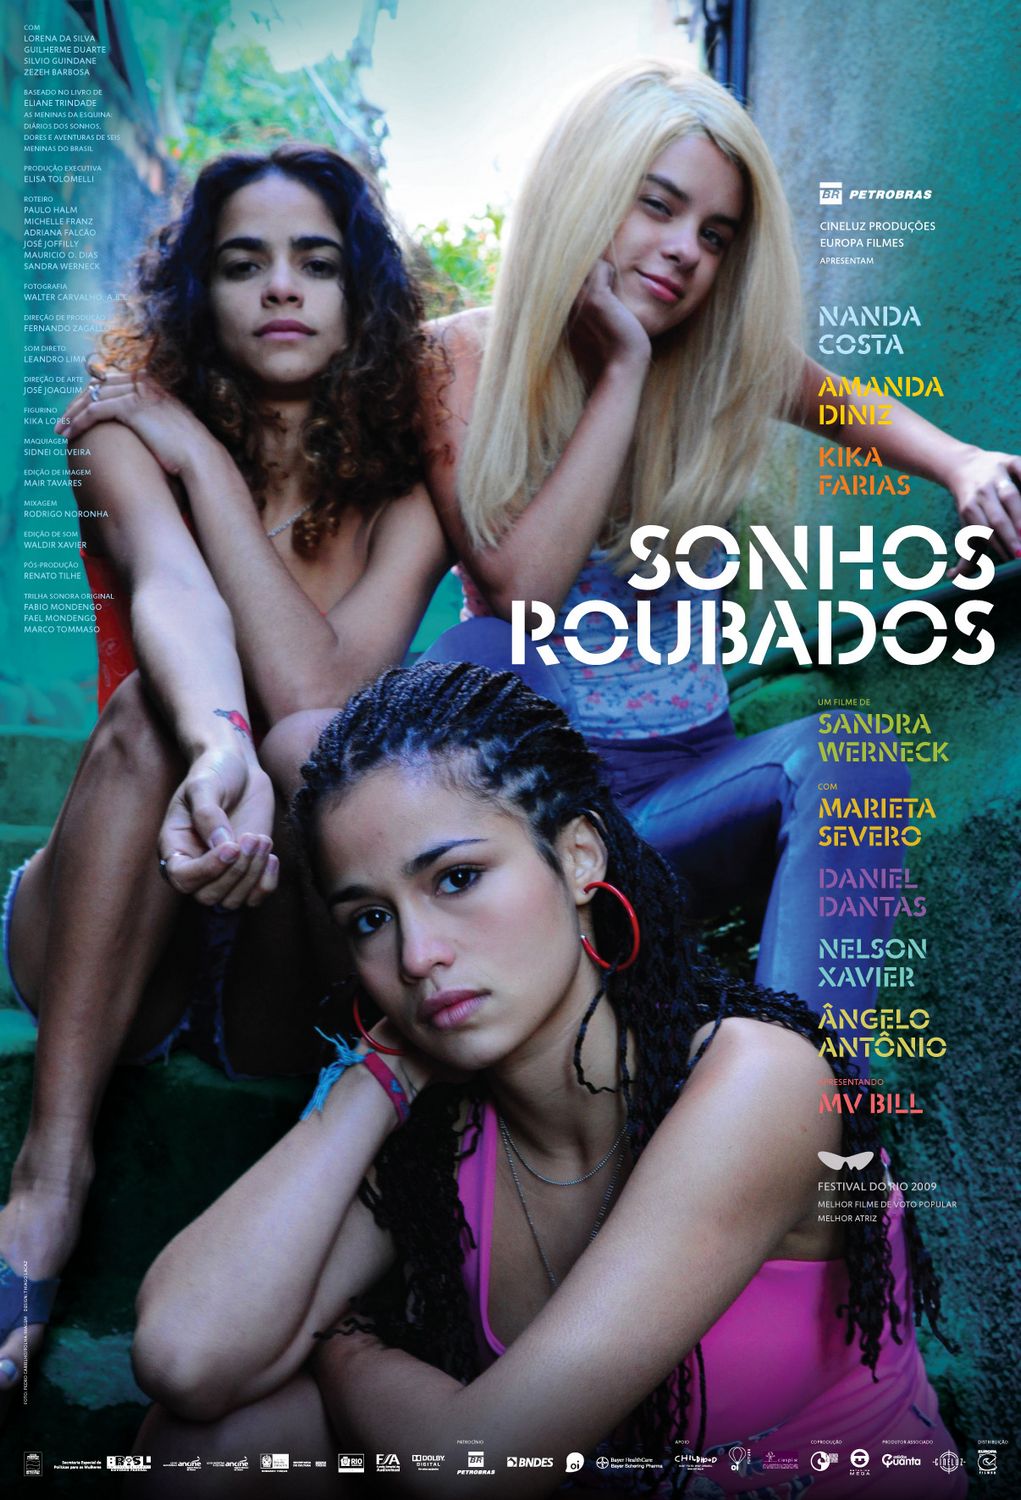 Extra Large Movie Poster Image for Sonhos Roubados 